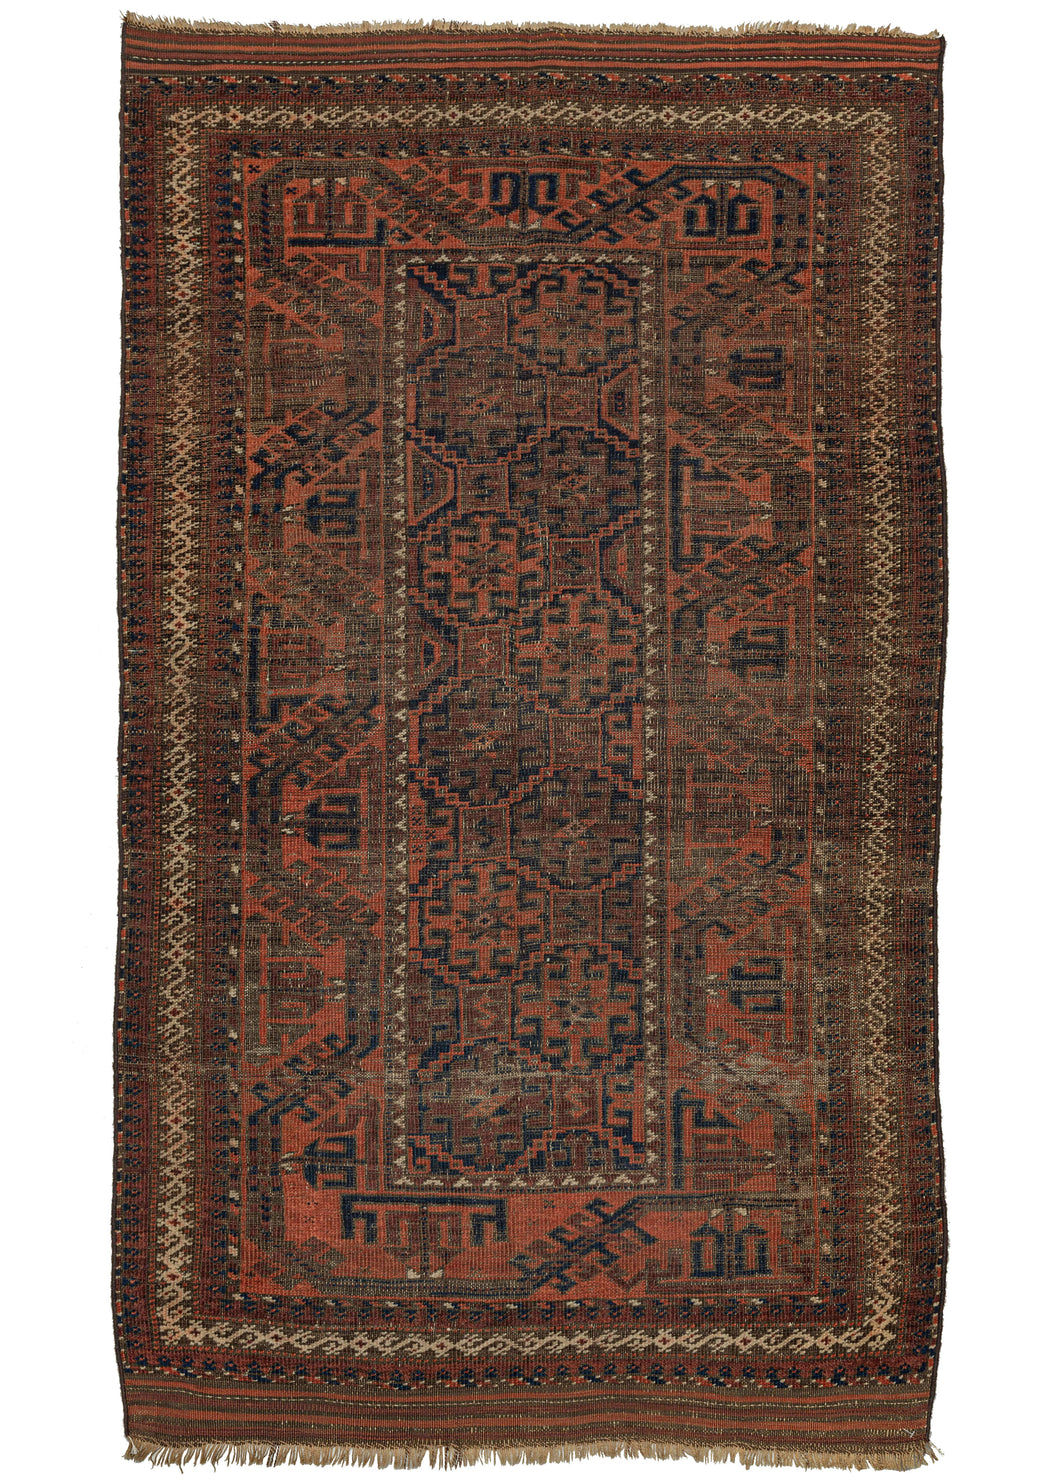 This Orange and Blue Baluch Rug features a thin field of latch hooked devices on a lattice grid only two columns wide.  A thick Turkmen line border that slithers around the perimeter and is further framed by a thin ivory scroll border composed of what may be an abstracted dragon motif. It utilizes a limited palette of orange, blue, brown, and ivory throughout. The play of scale and rhythmic use of negative space create an effective rendition with lots of movement for such a restrictive palette.